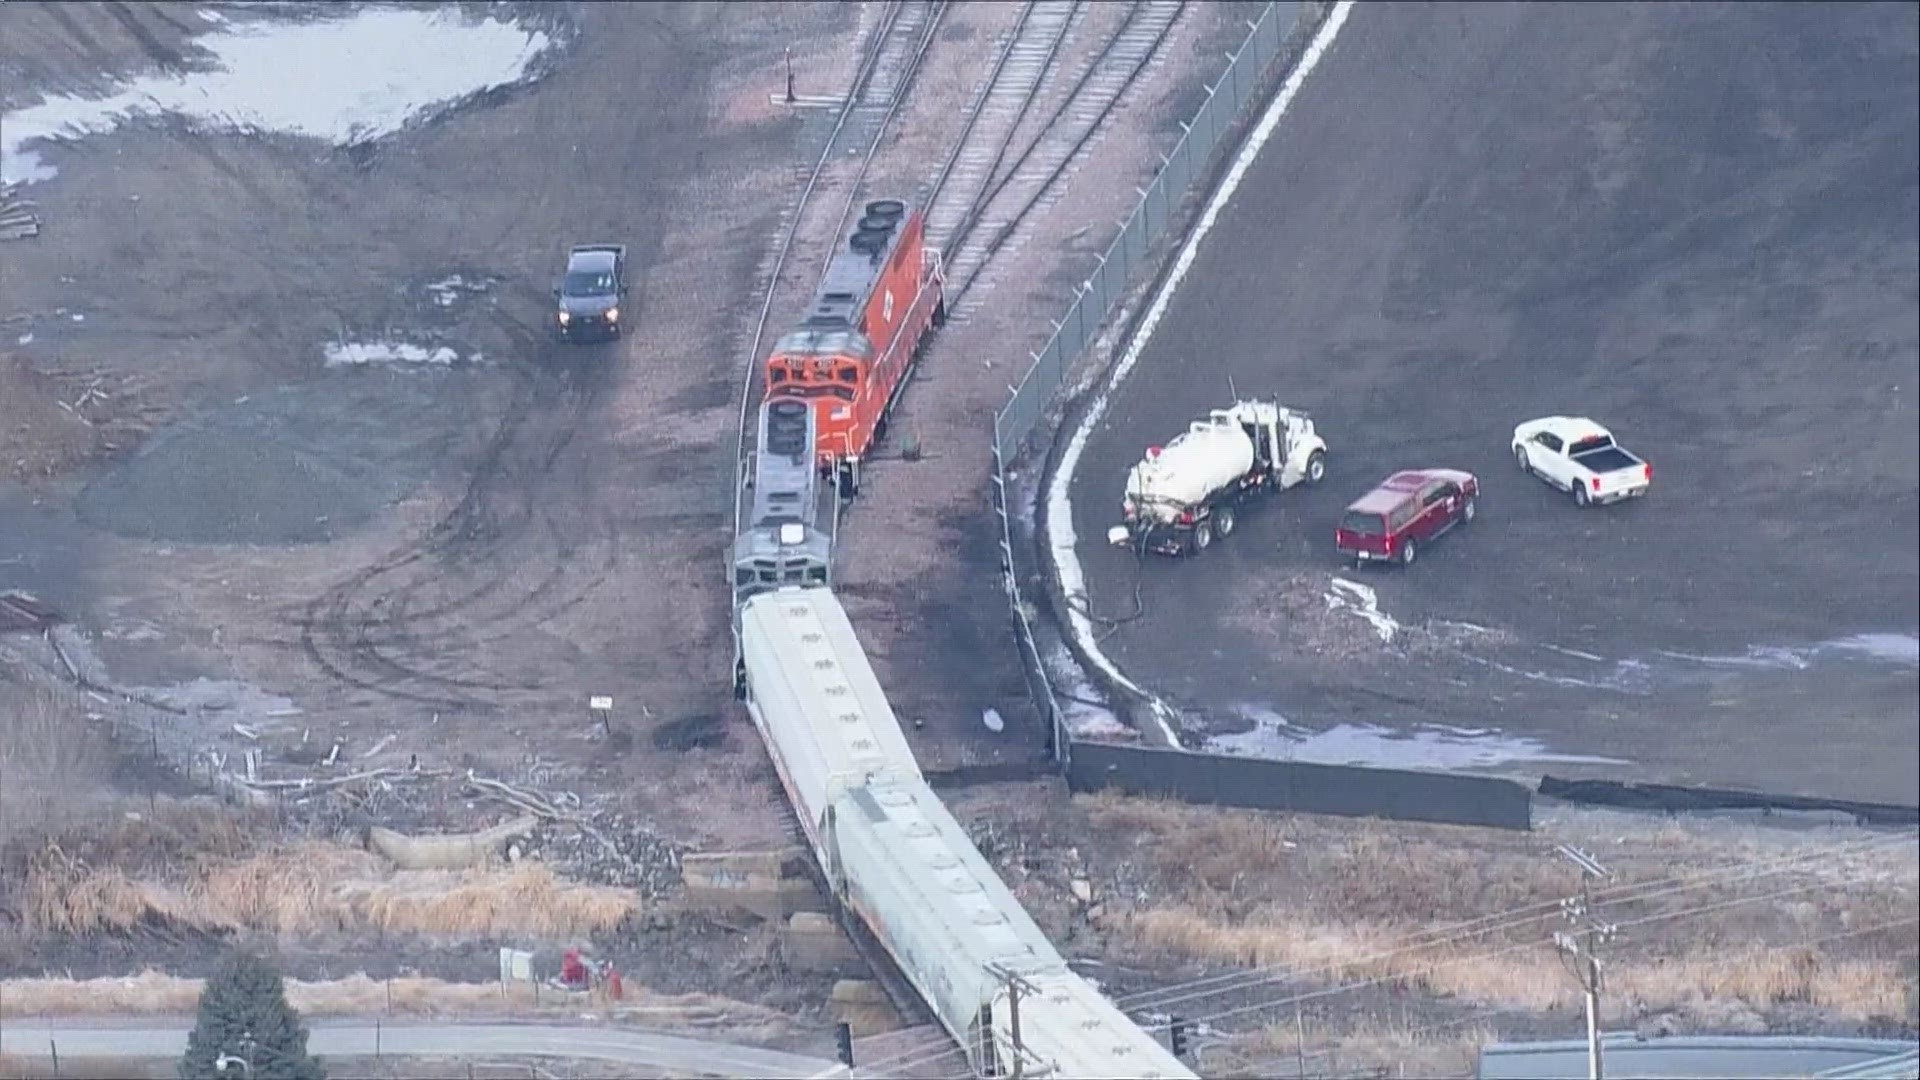 The railroad had called in their own hazmat contractor to take care of a diesel spill, according to Loveland Fire.